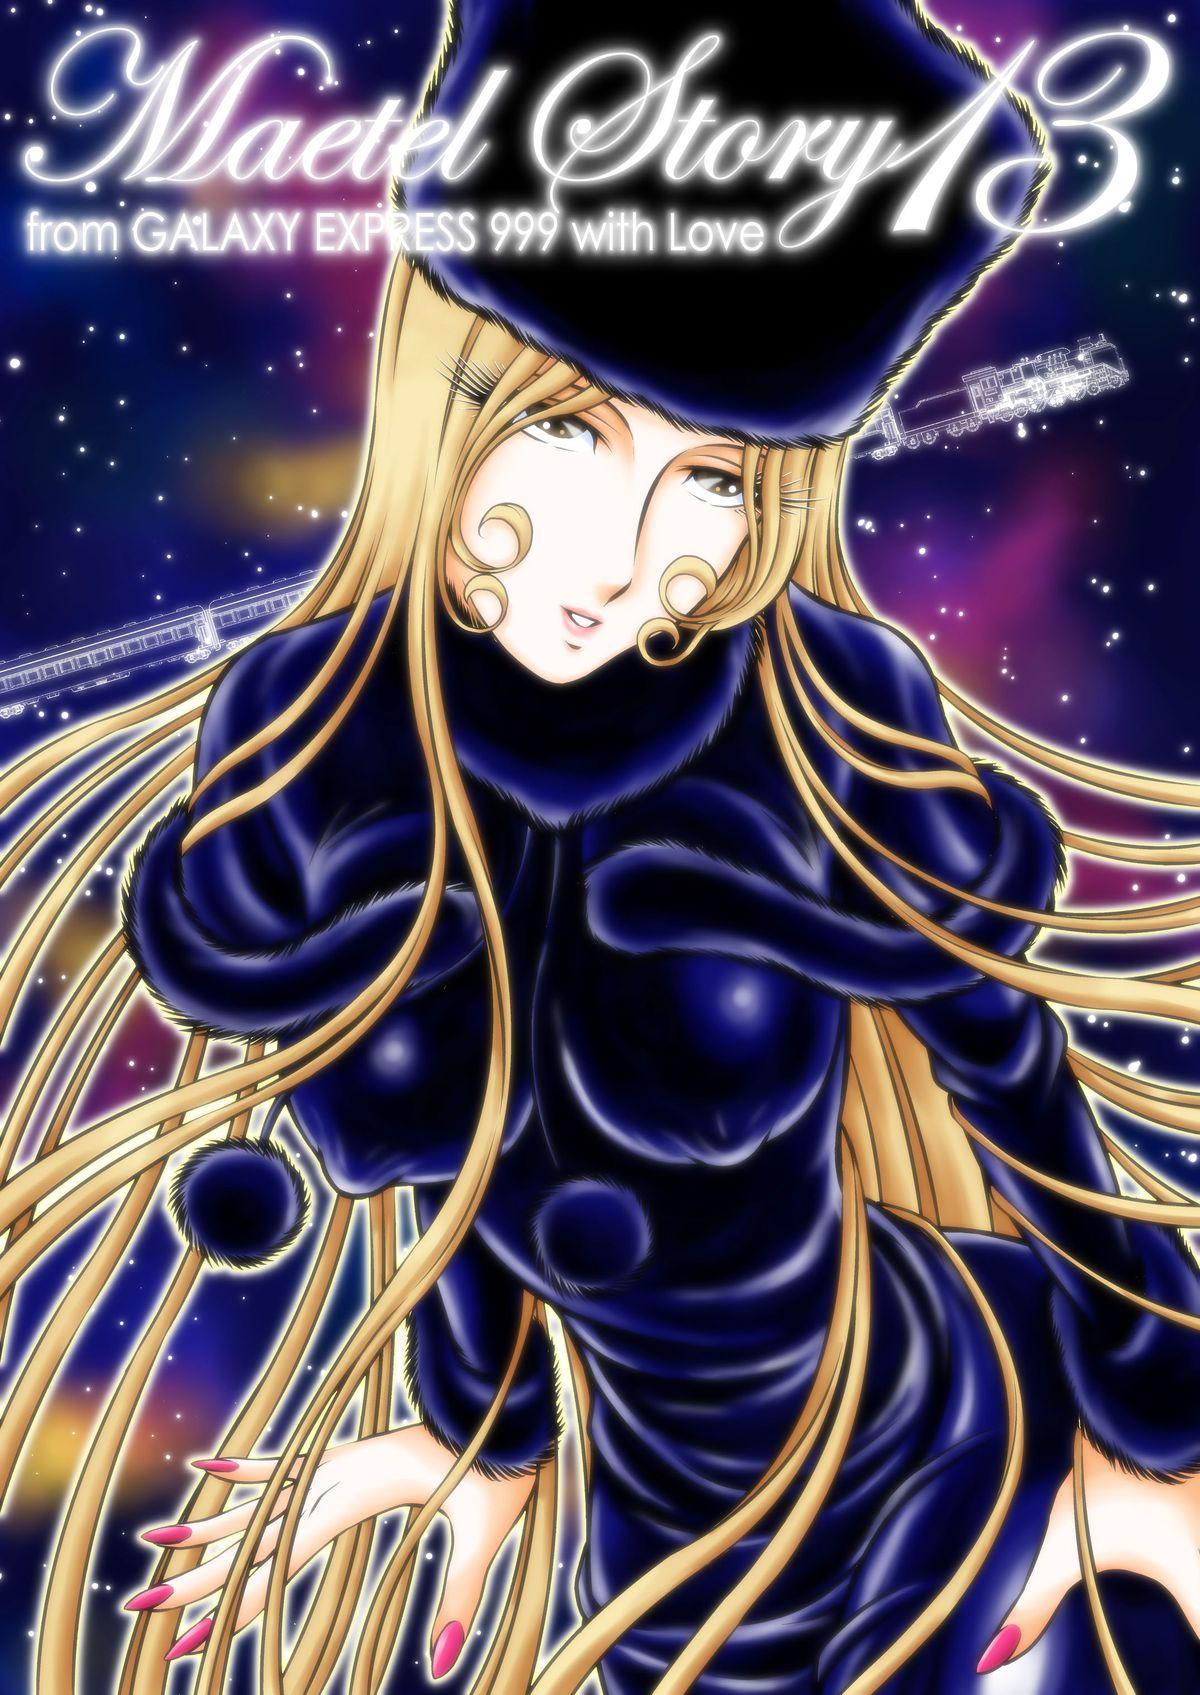 Homemade Maetel Story 13 - Galaxy express 999 Hot Brunette - Picture 1